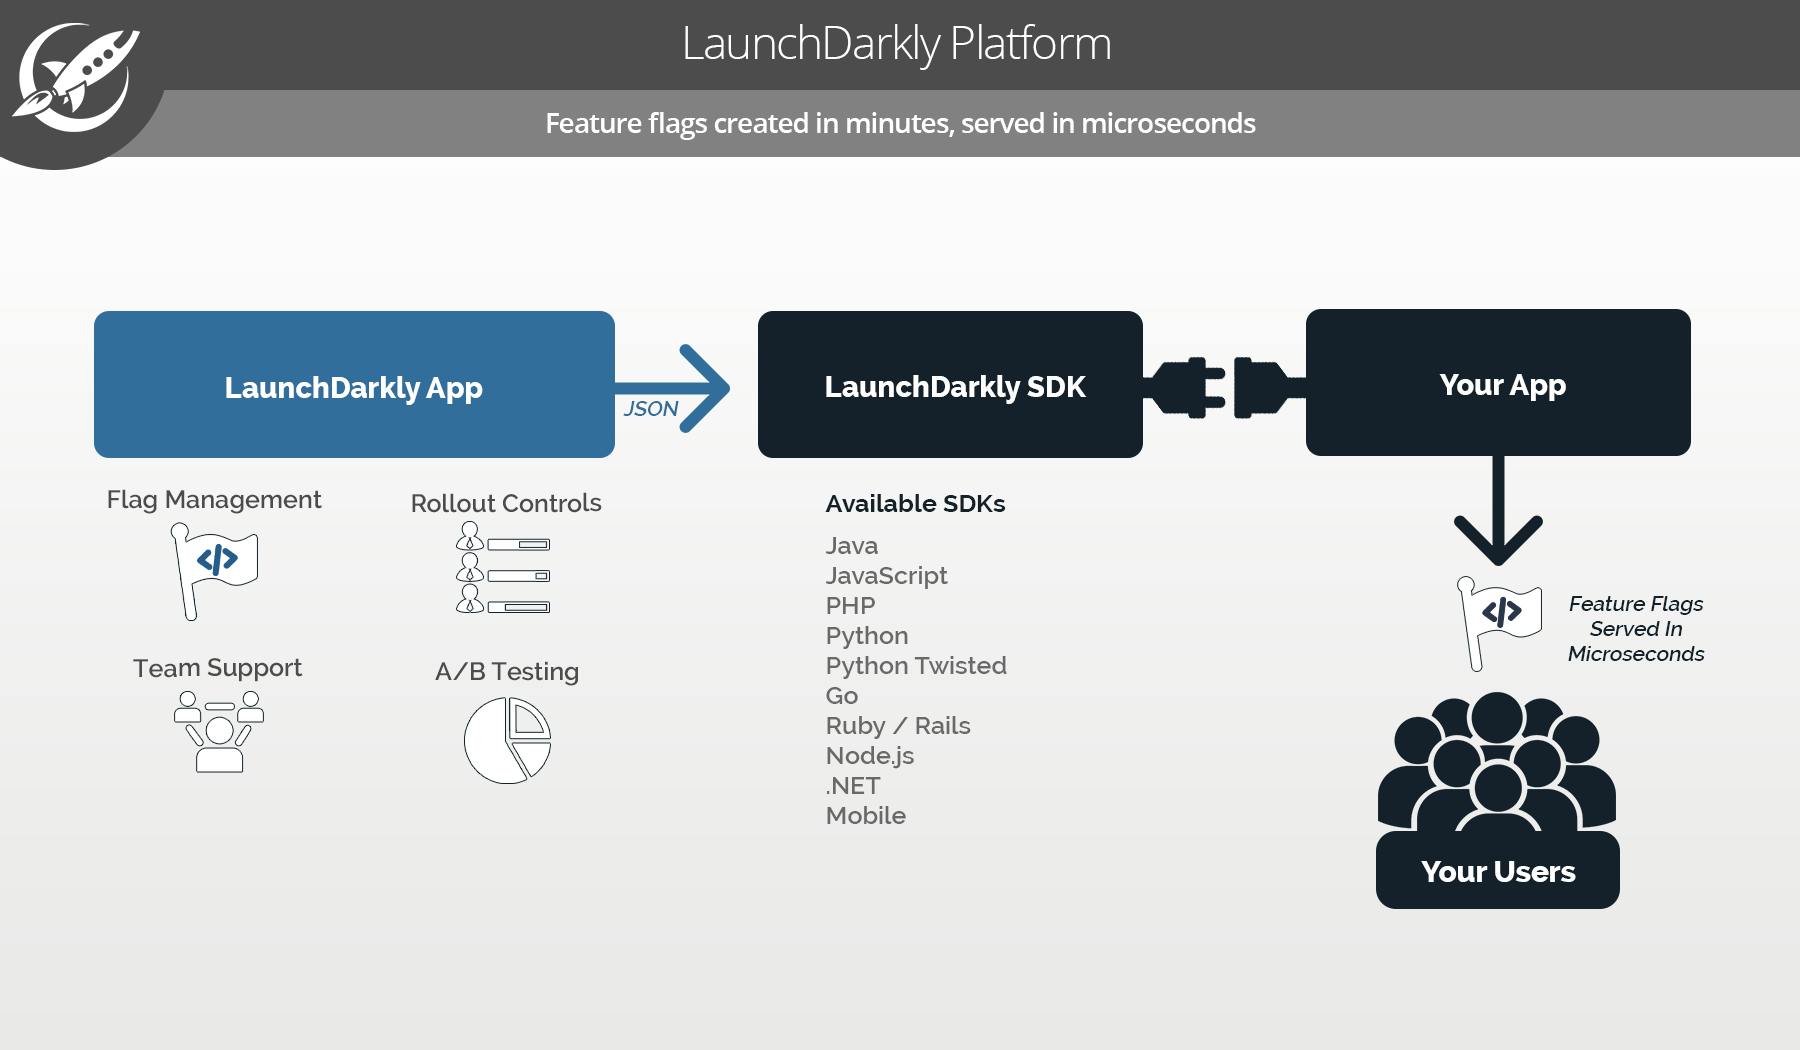 Getting started with LaunchDarkly